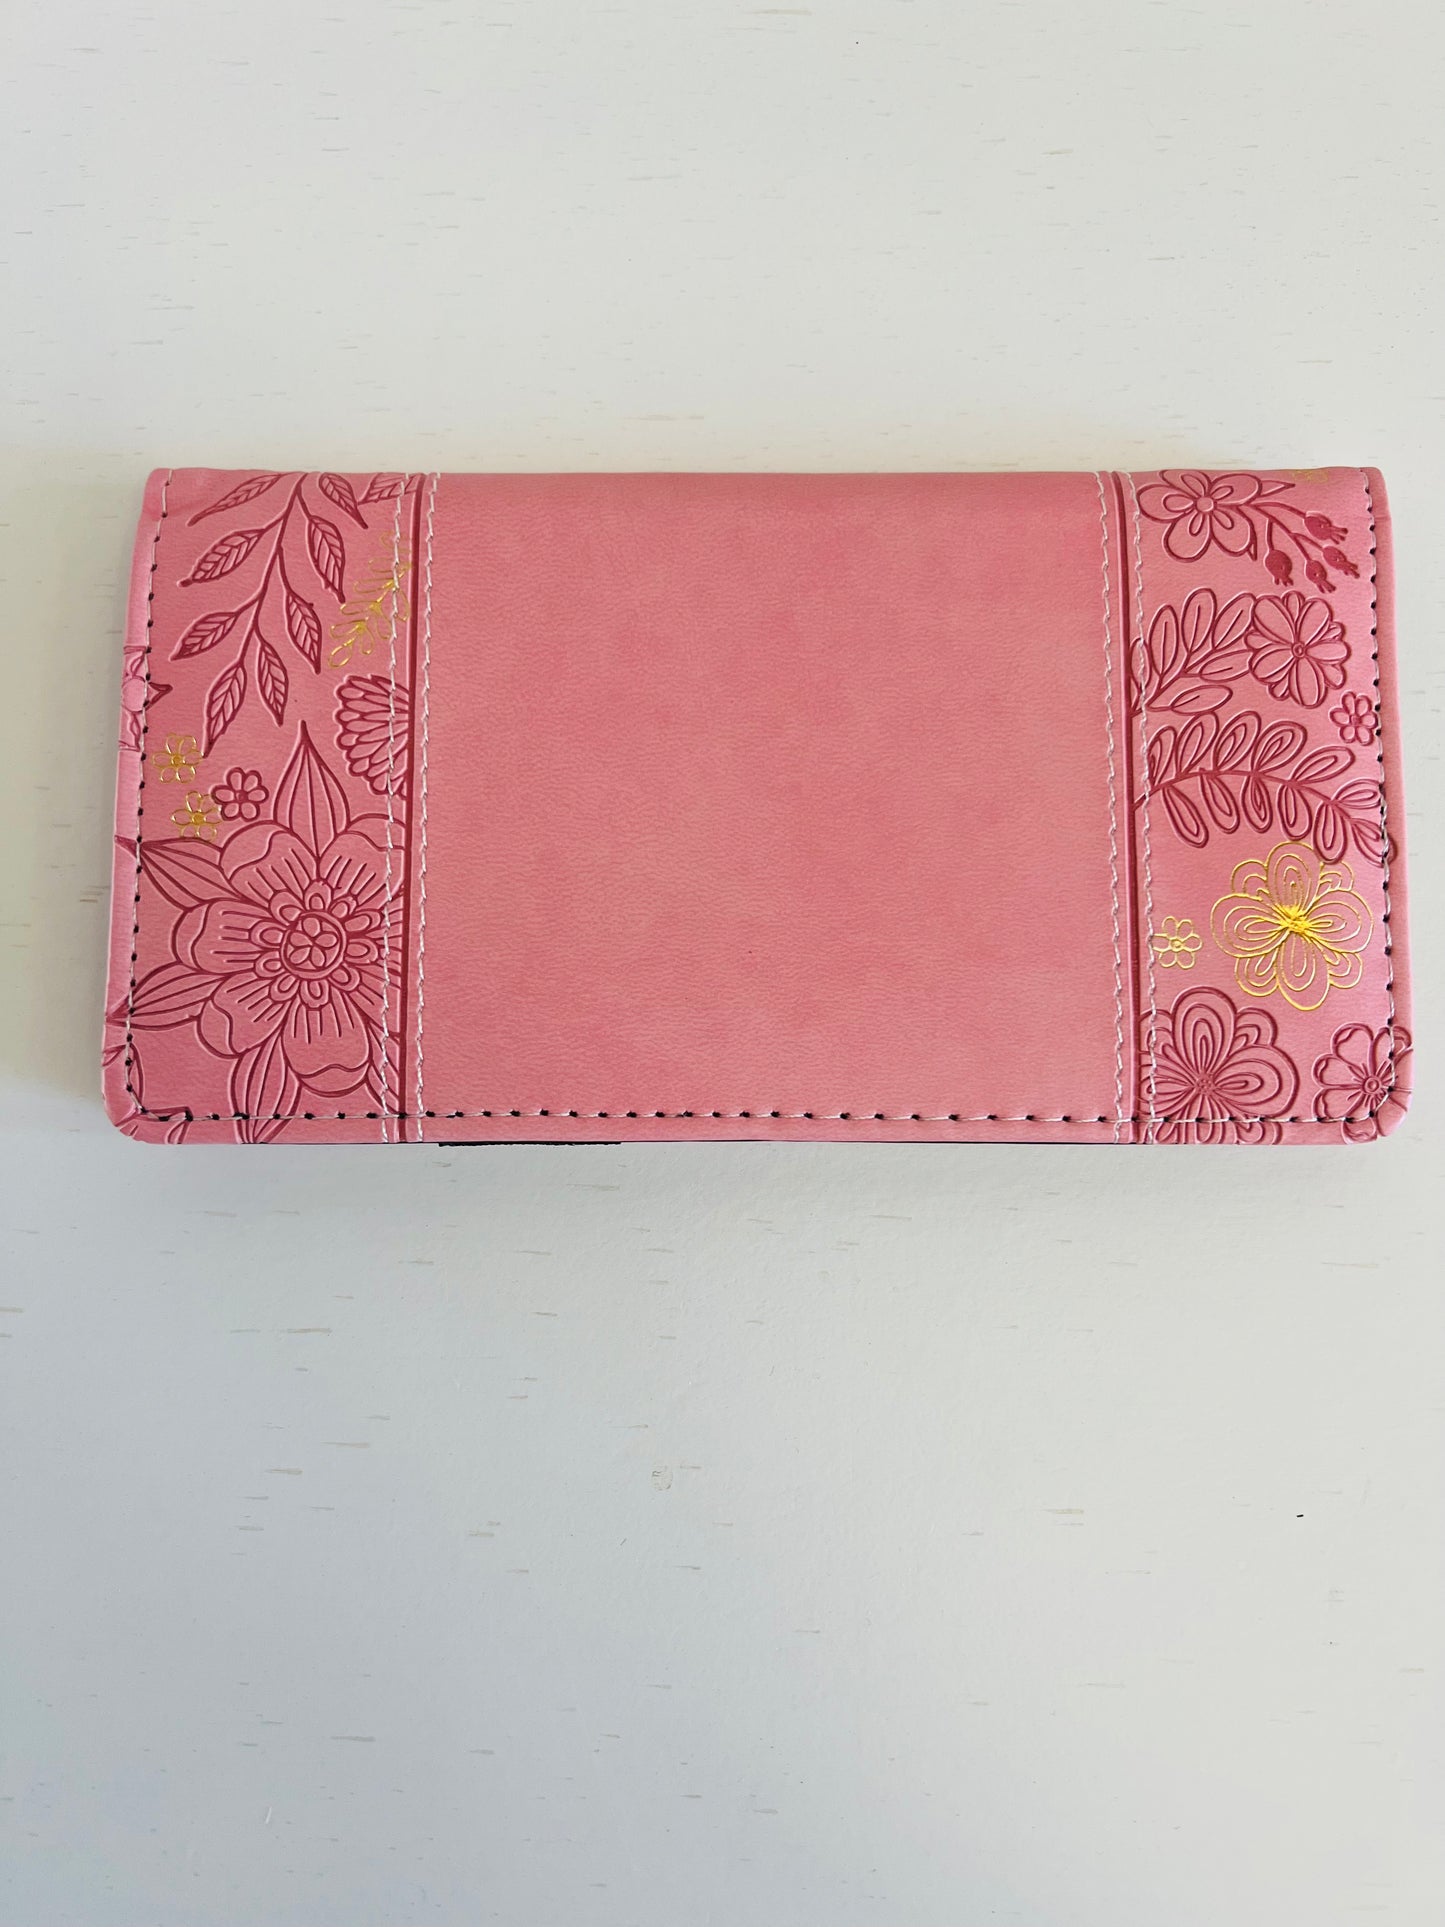 Through Christ Pink Checkbook Cover